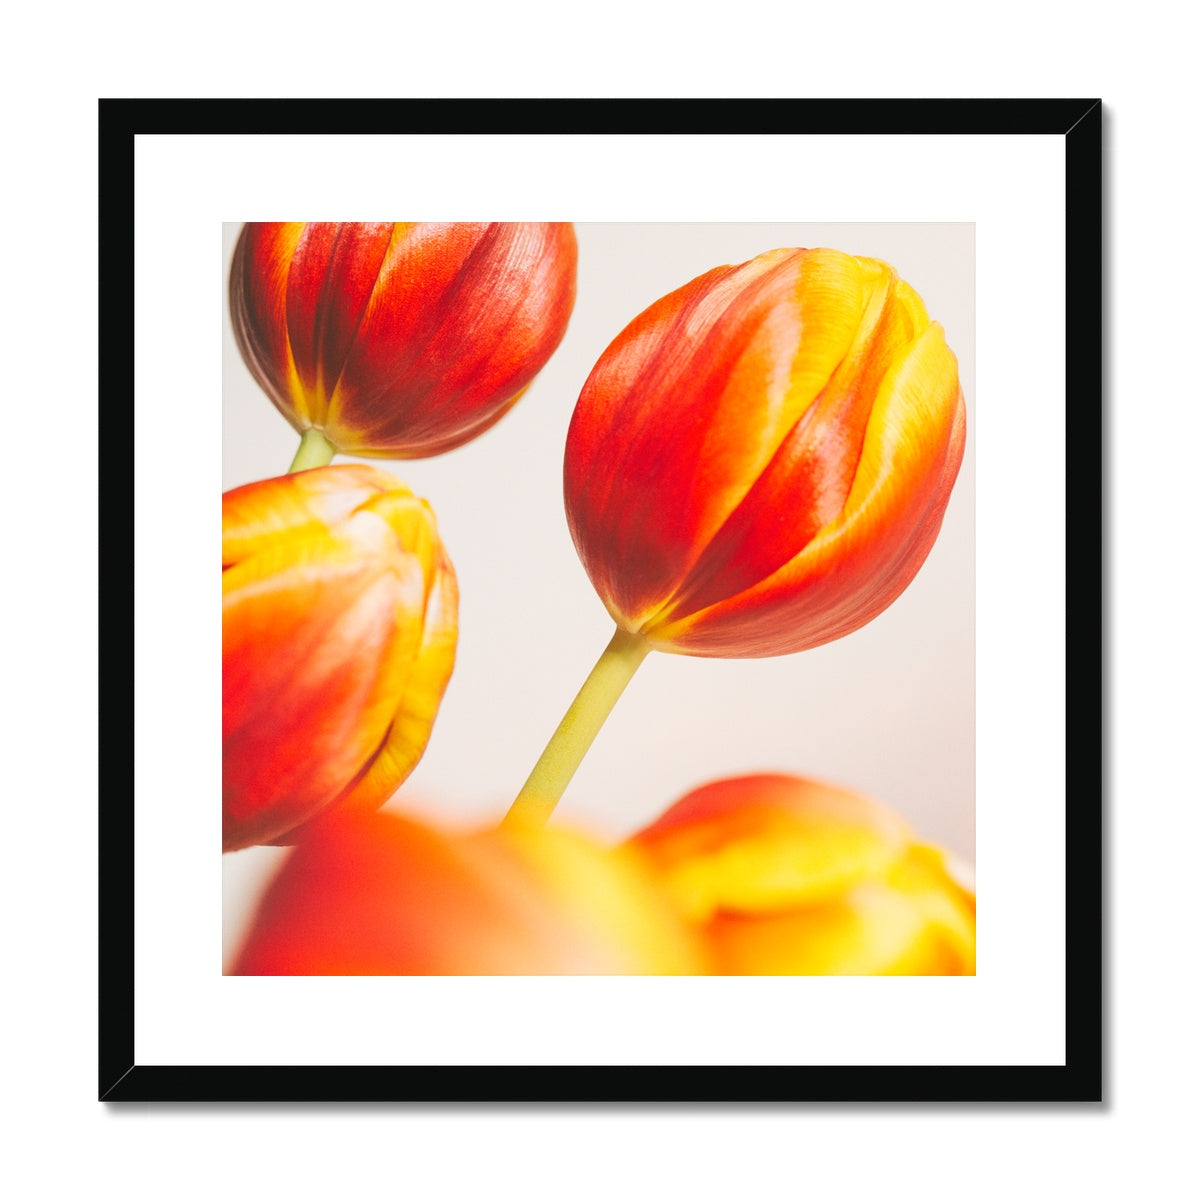 'Table Tulips (no.132)' 2020 Framed & Mounted Print